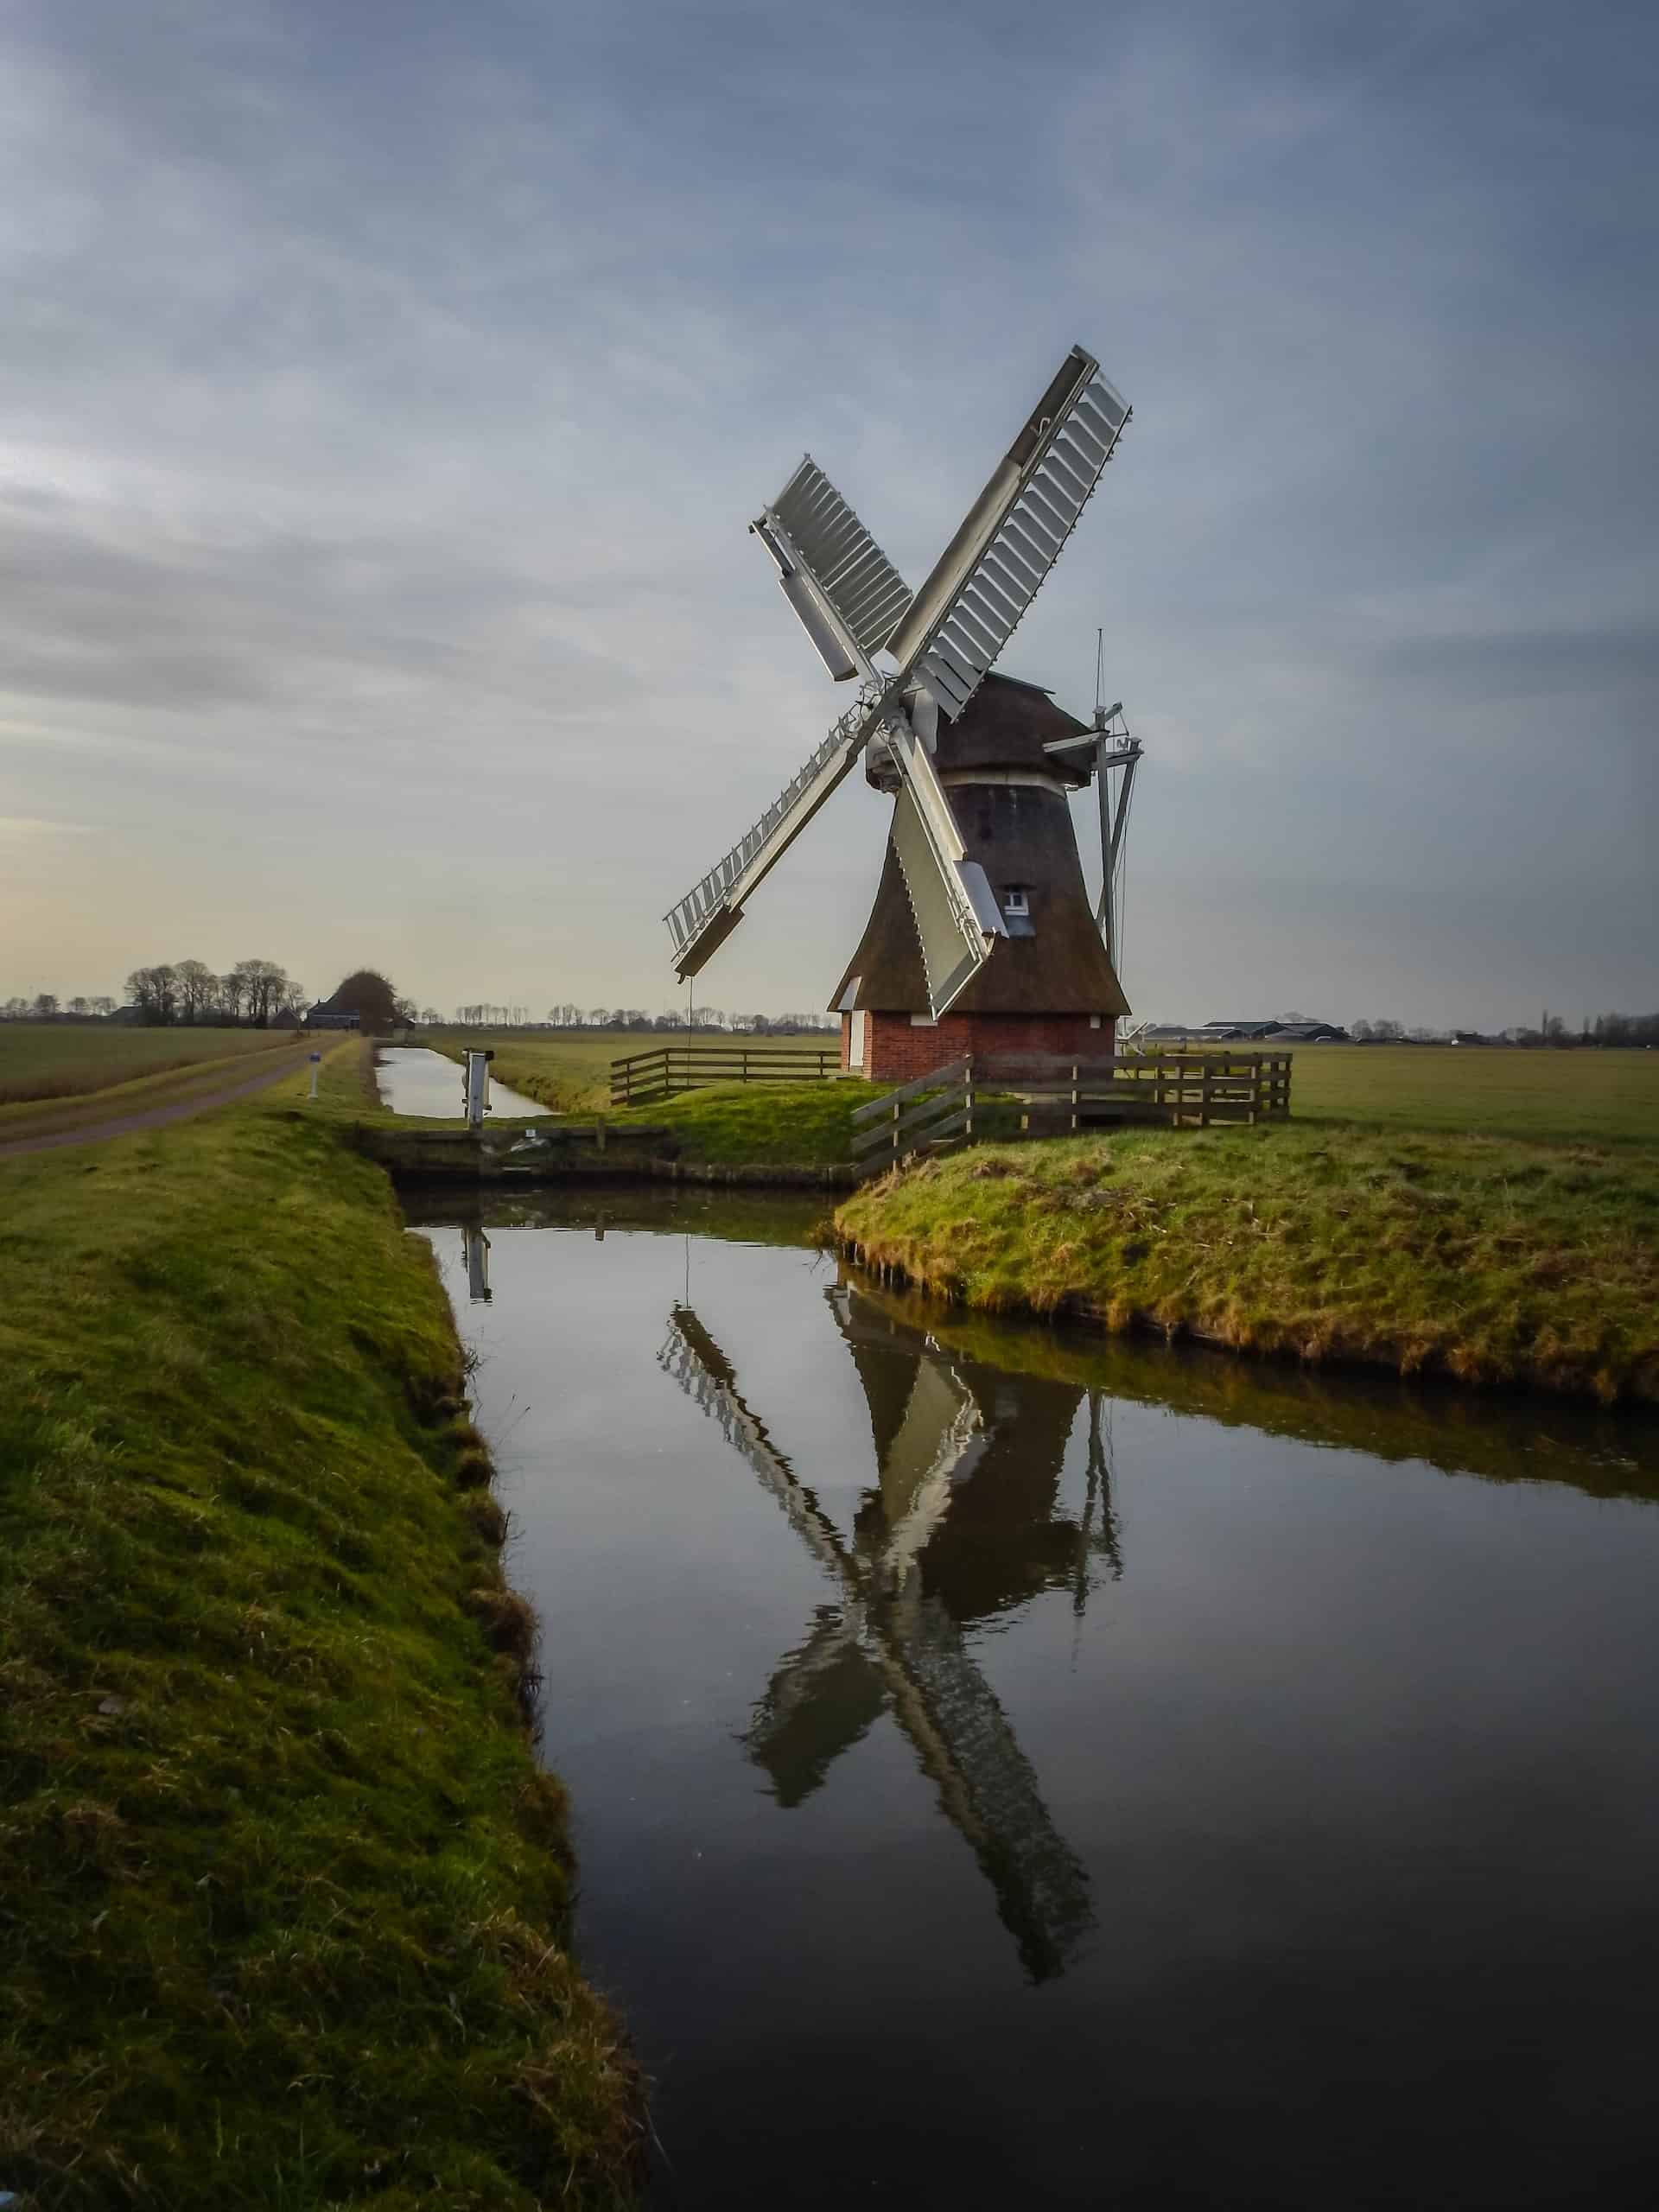 Best things to do in Groningen Netherlands - Kayla Ihrig - The White Lamb windmill by Denise Jans on Unsplash